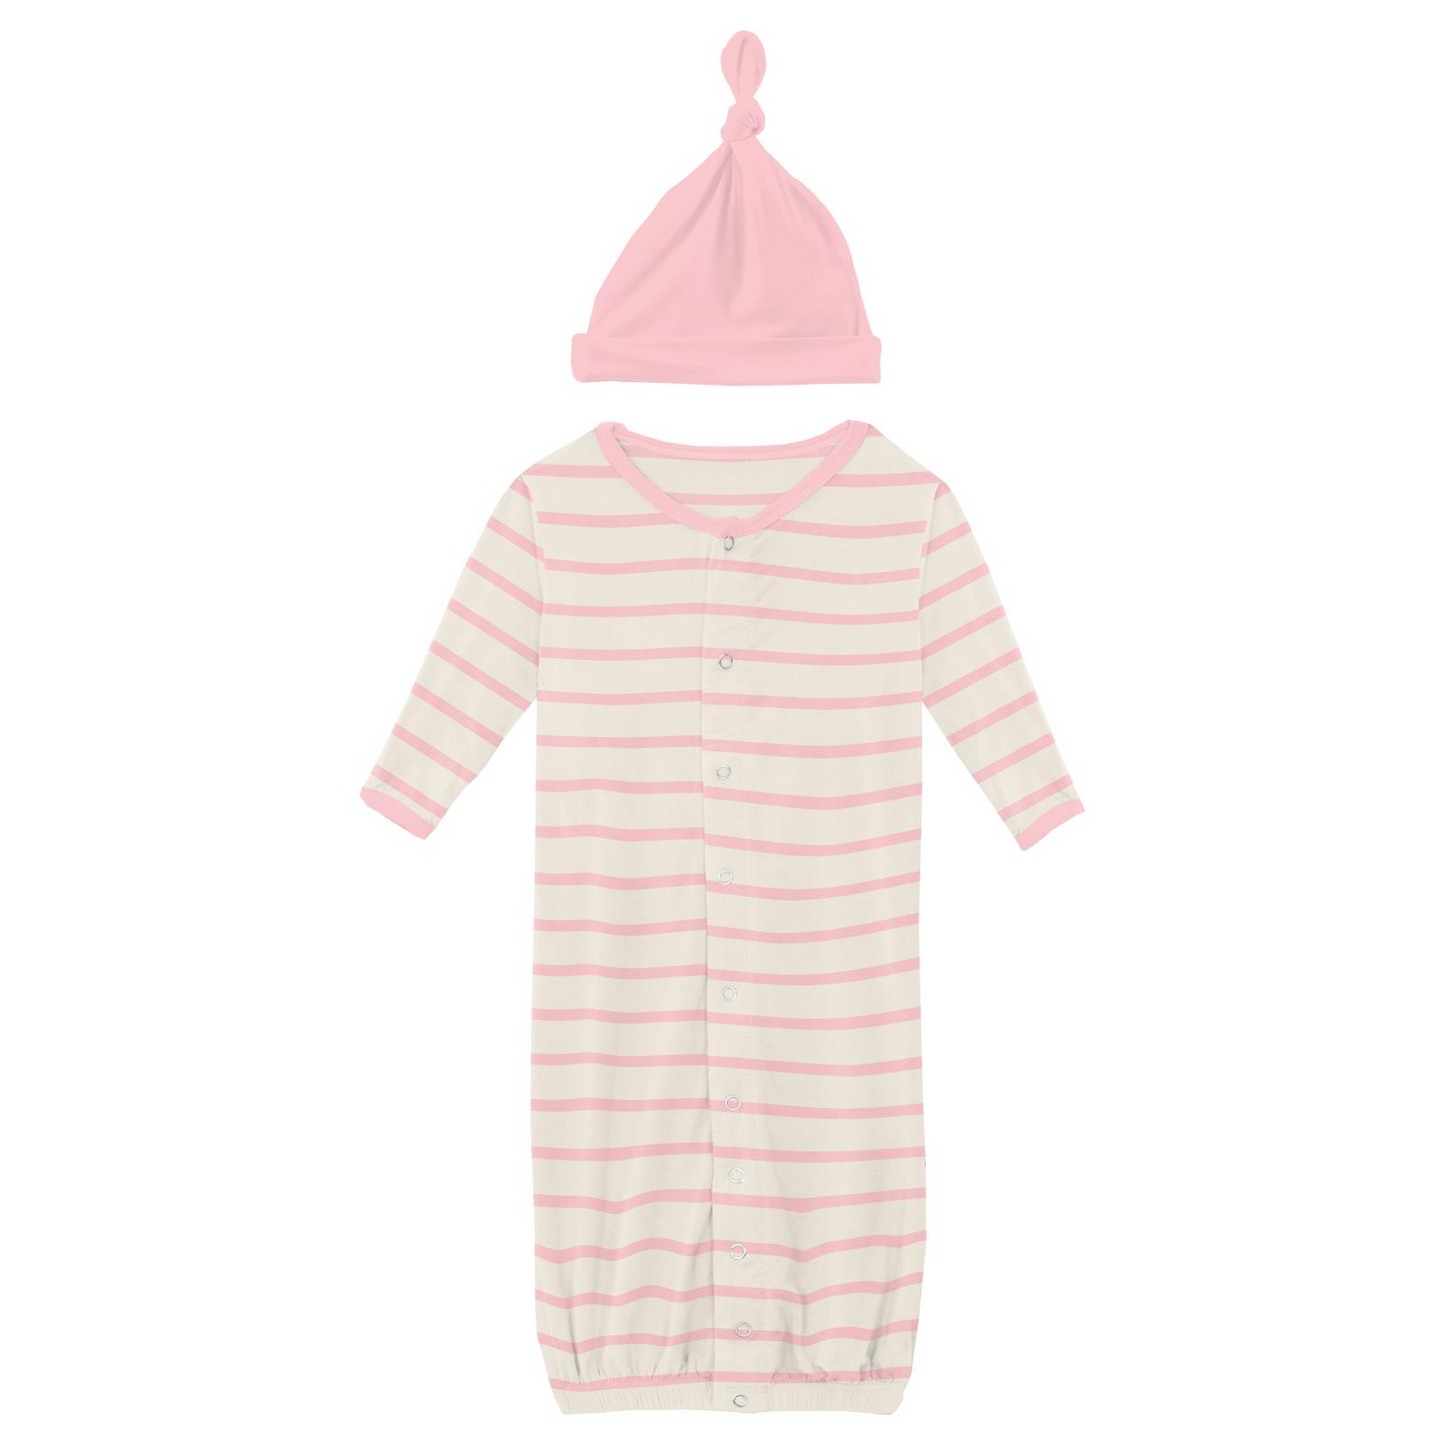 Layette Gown Converter & Single Knot Hat Set